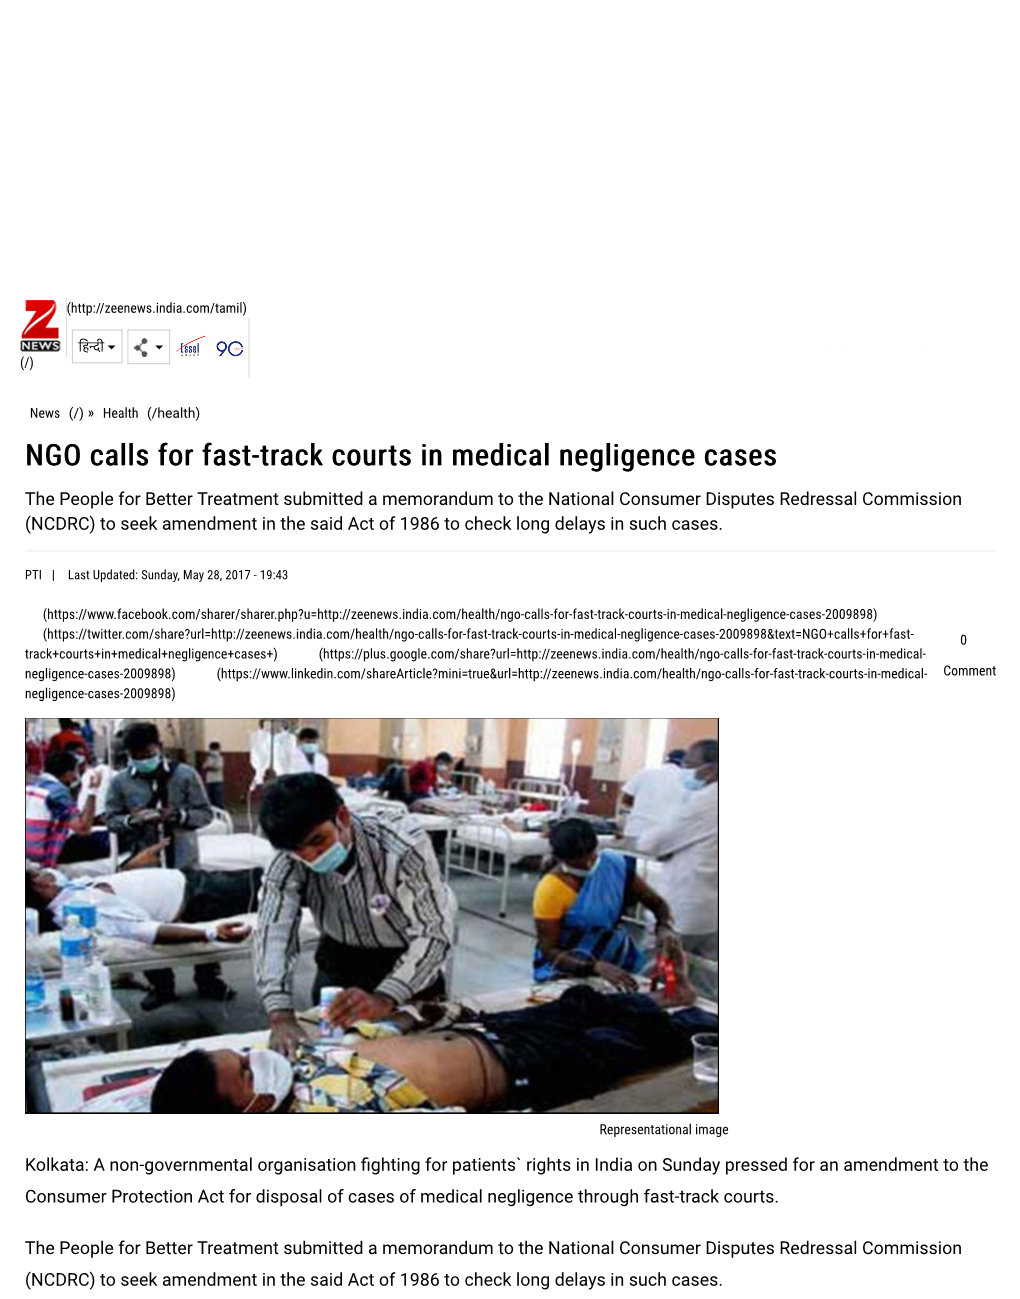 NGO Calls for Fast-Track Courts in Medical Negligence Cases